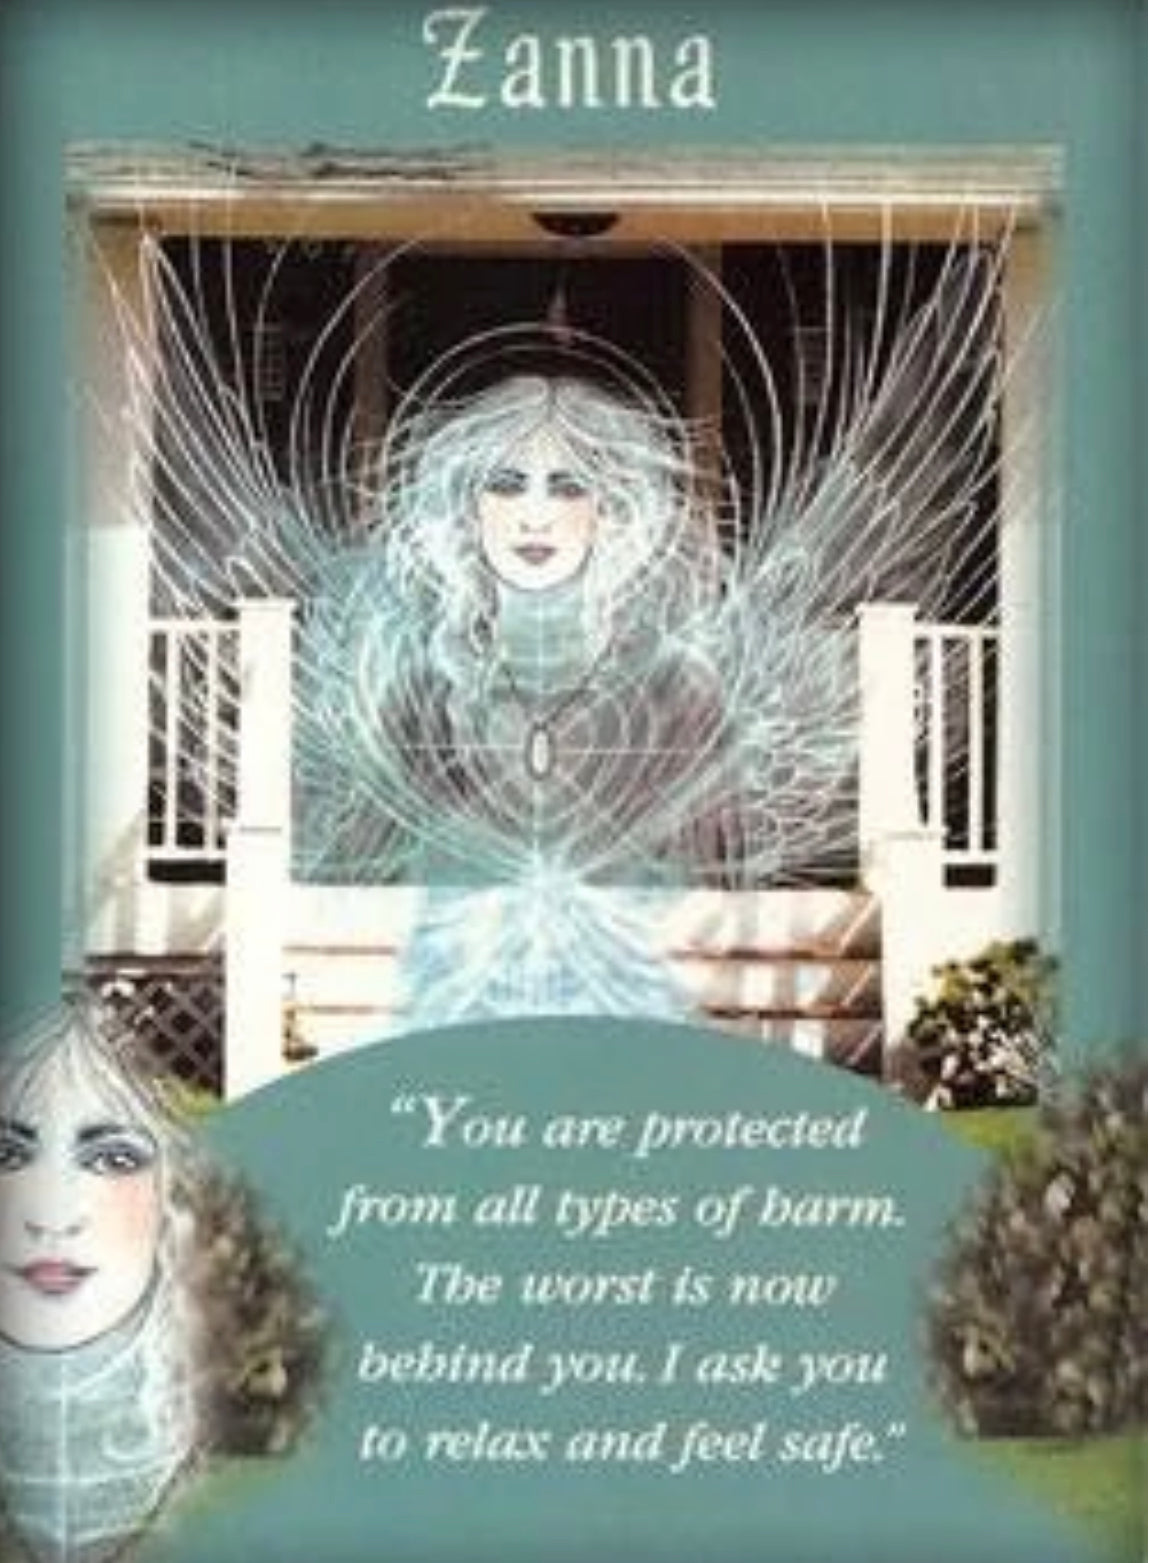 You are protected from all types of harm. The worst is now behind you. I ask you to relax and feel safe.